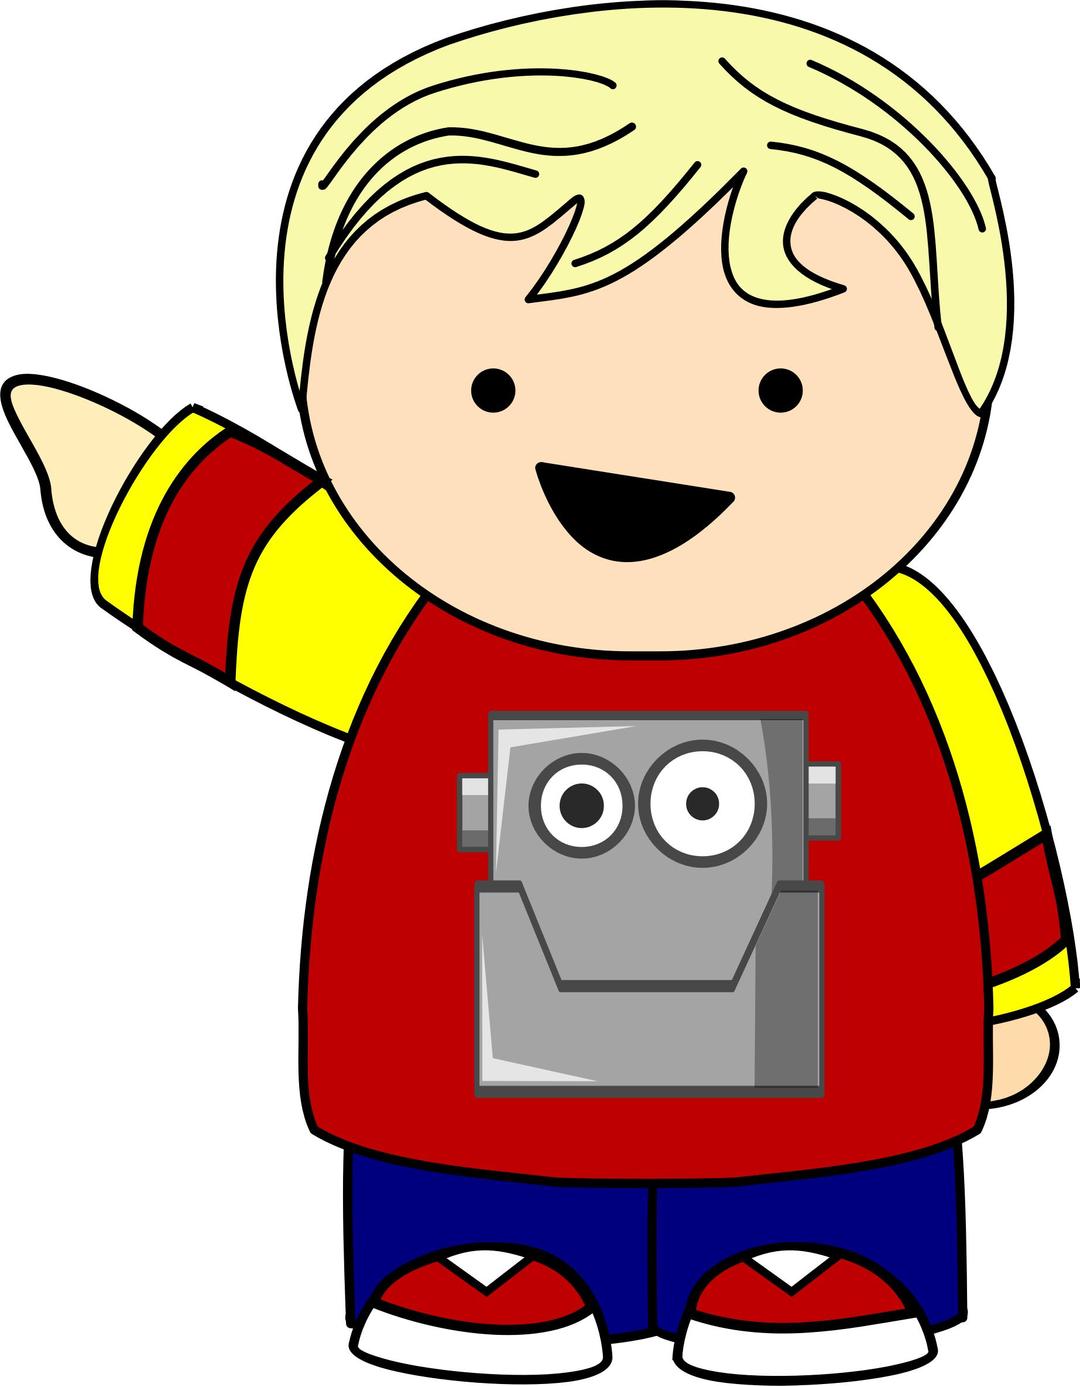 Pointing Kid in Robot Shirt png transparent